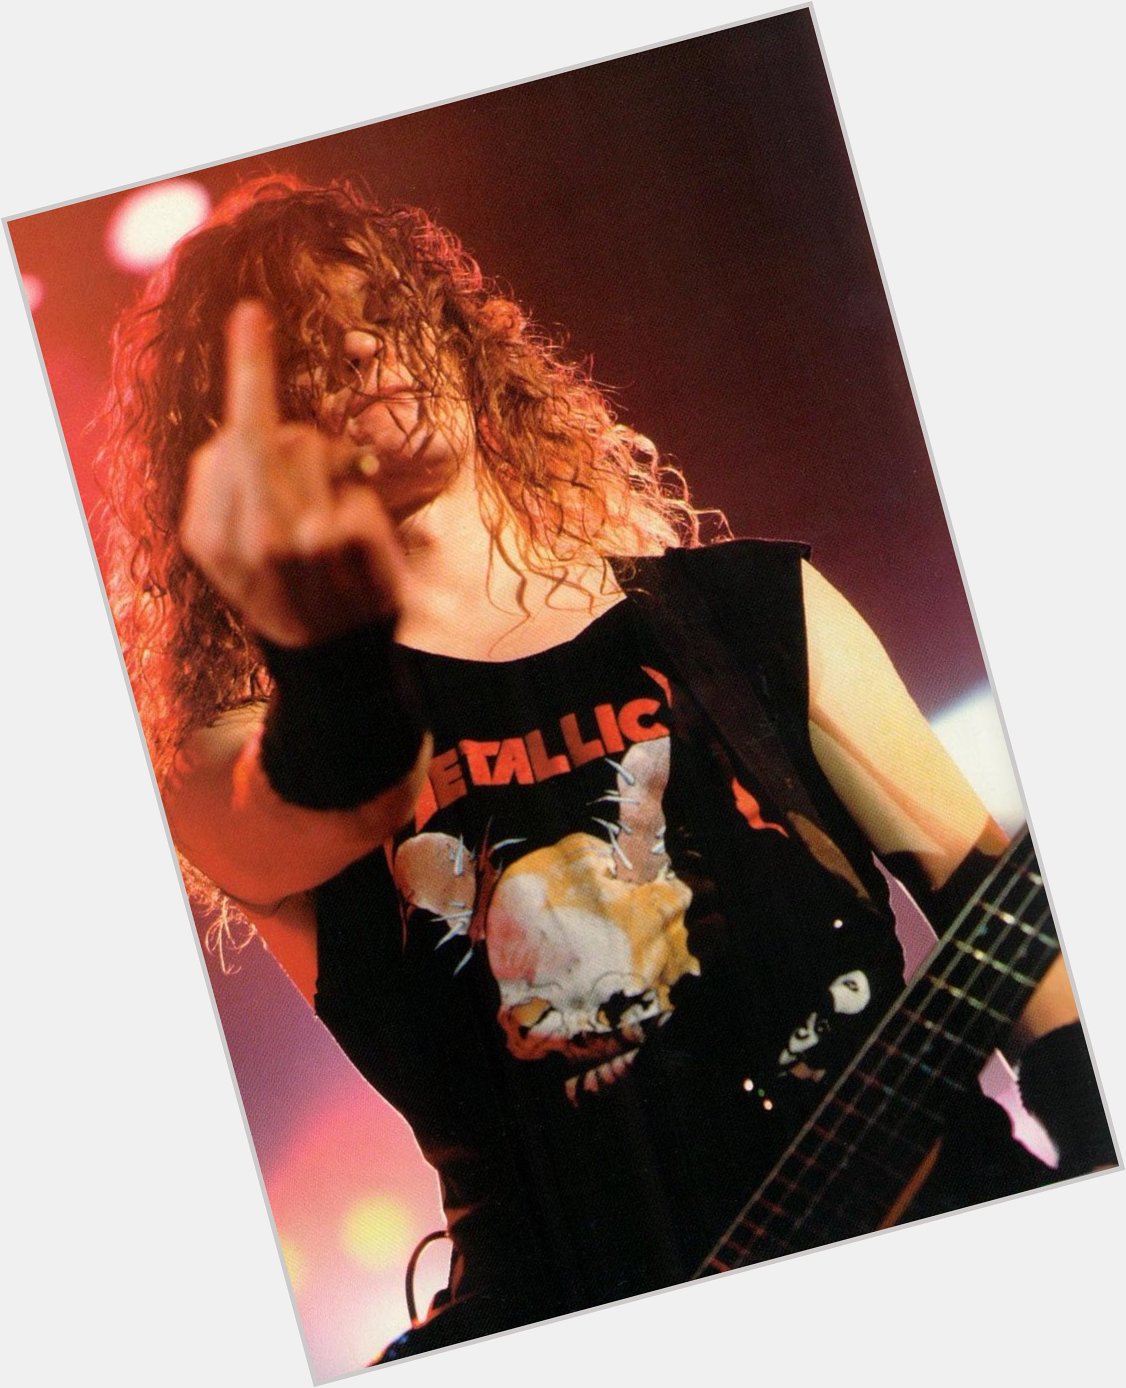 Happy 55th Birthday To Jason Newsted - Metallica, Ozzy Osbourne And Many More. 